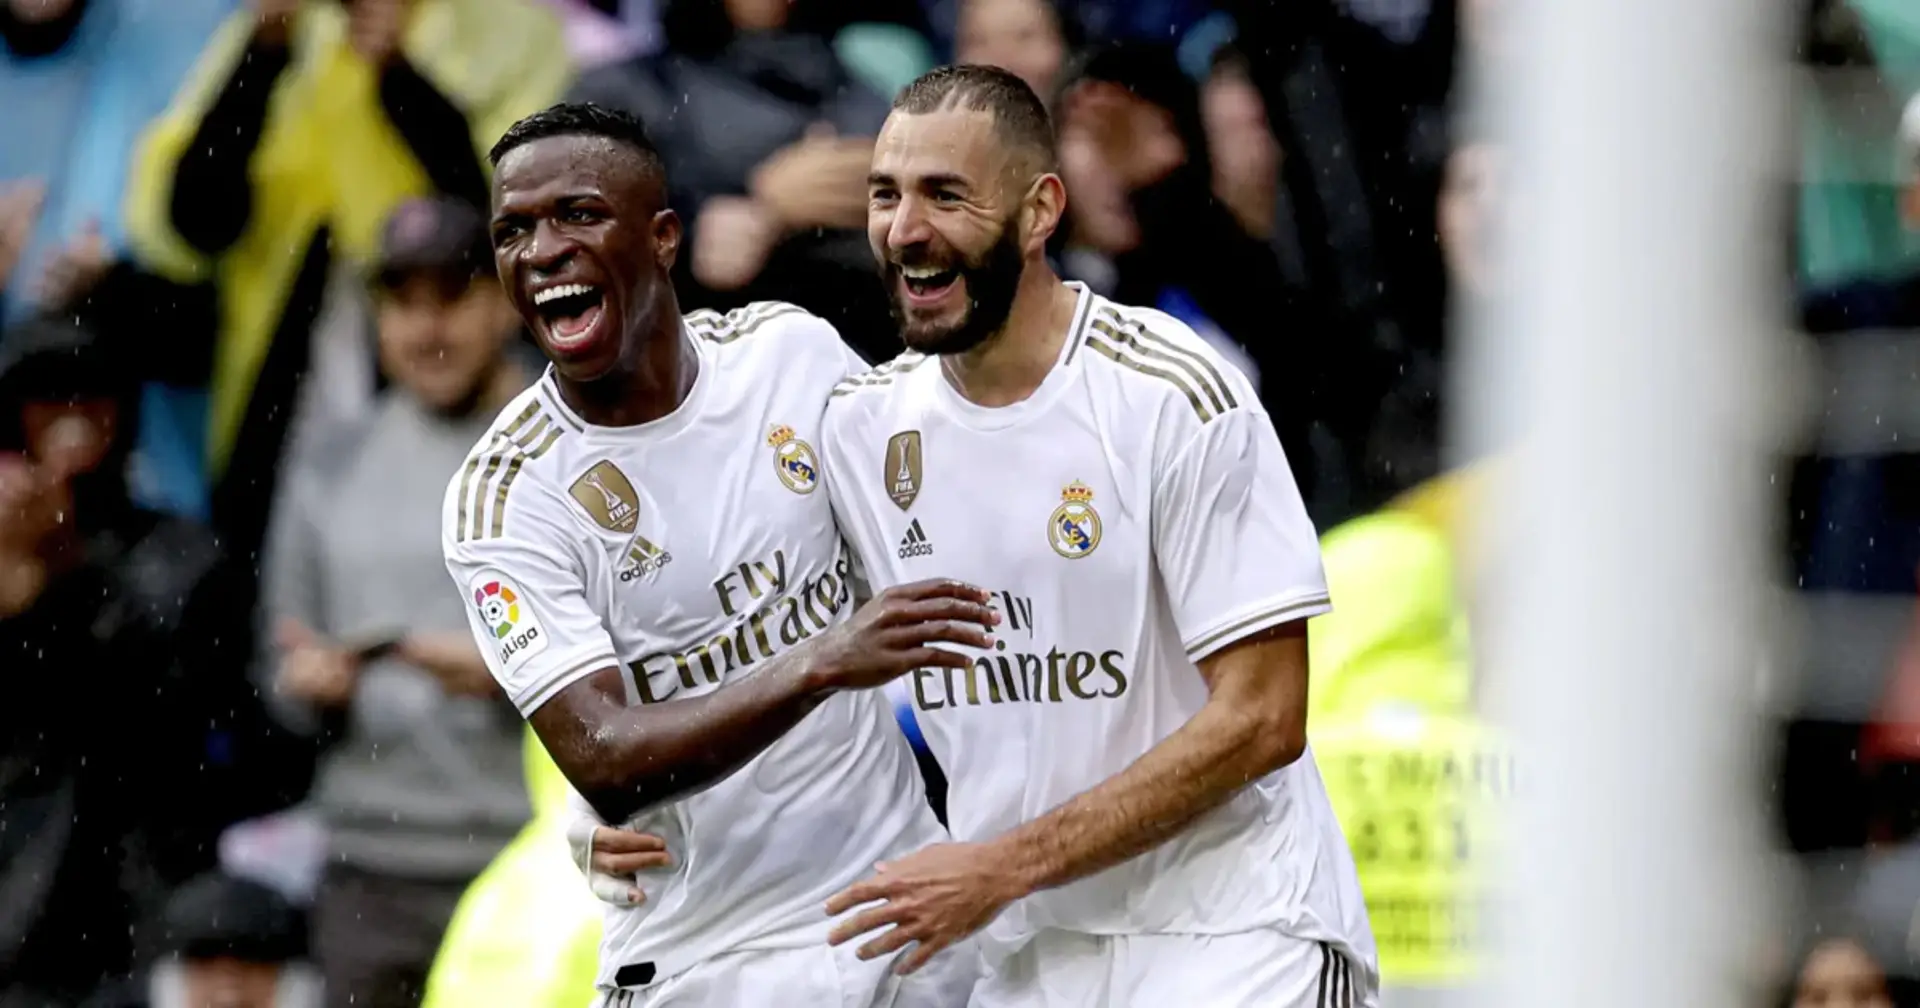 All's well that ends well: Karim Benzema hails Vinicius Junior with Instagram post 